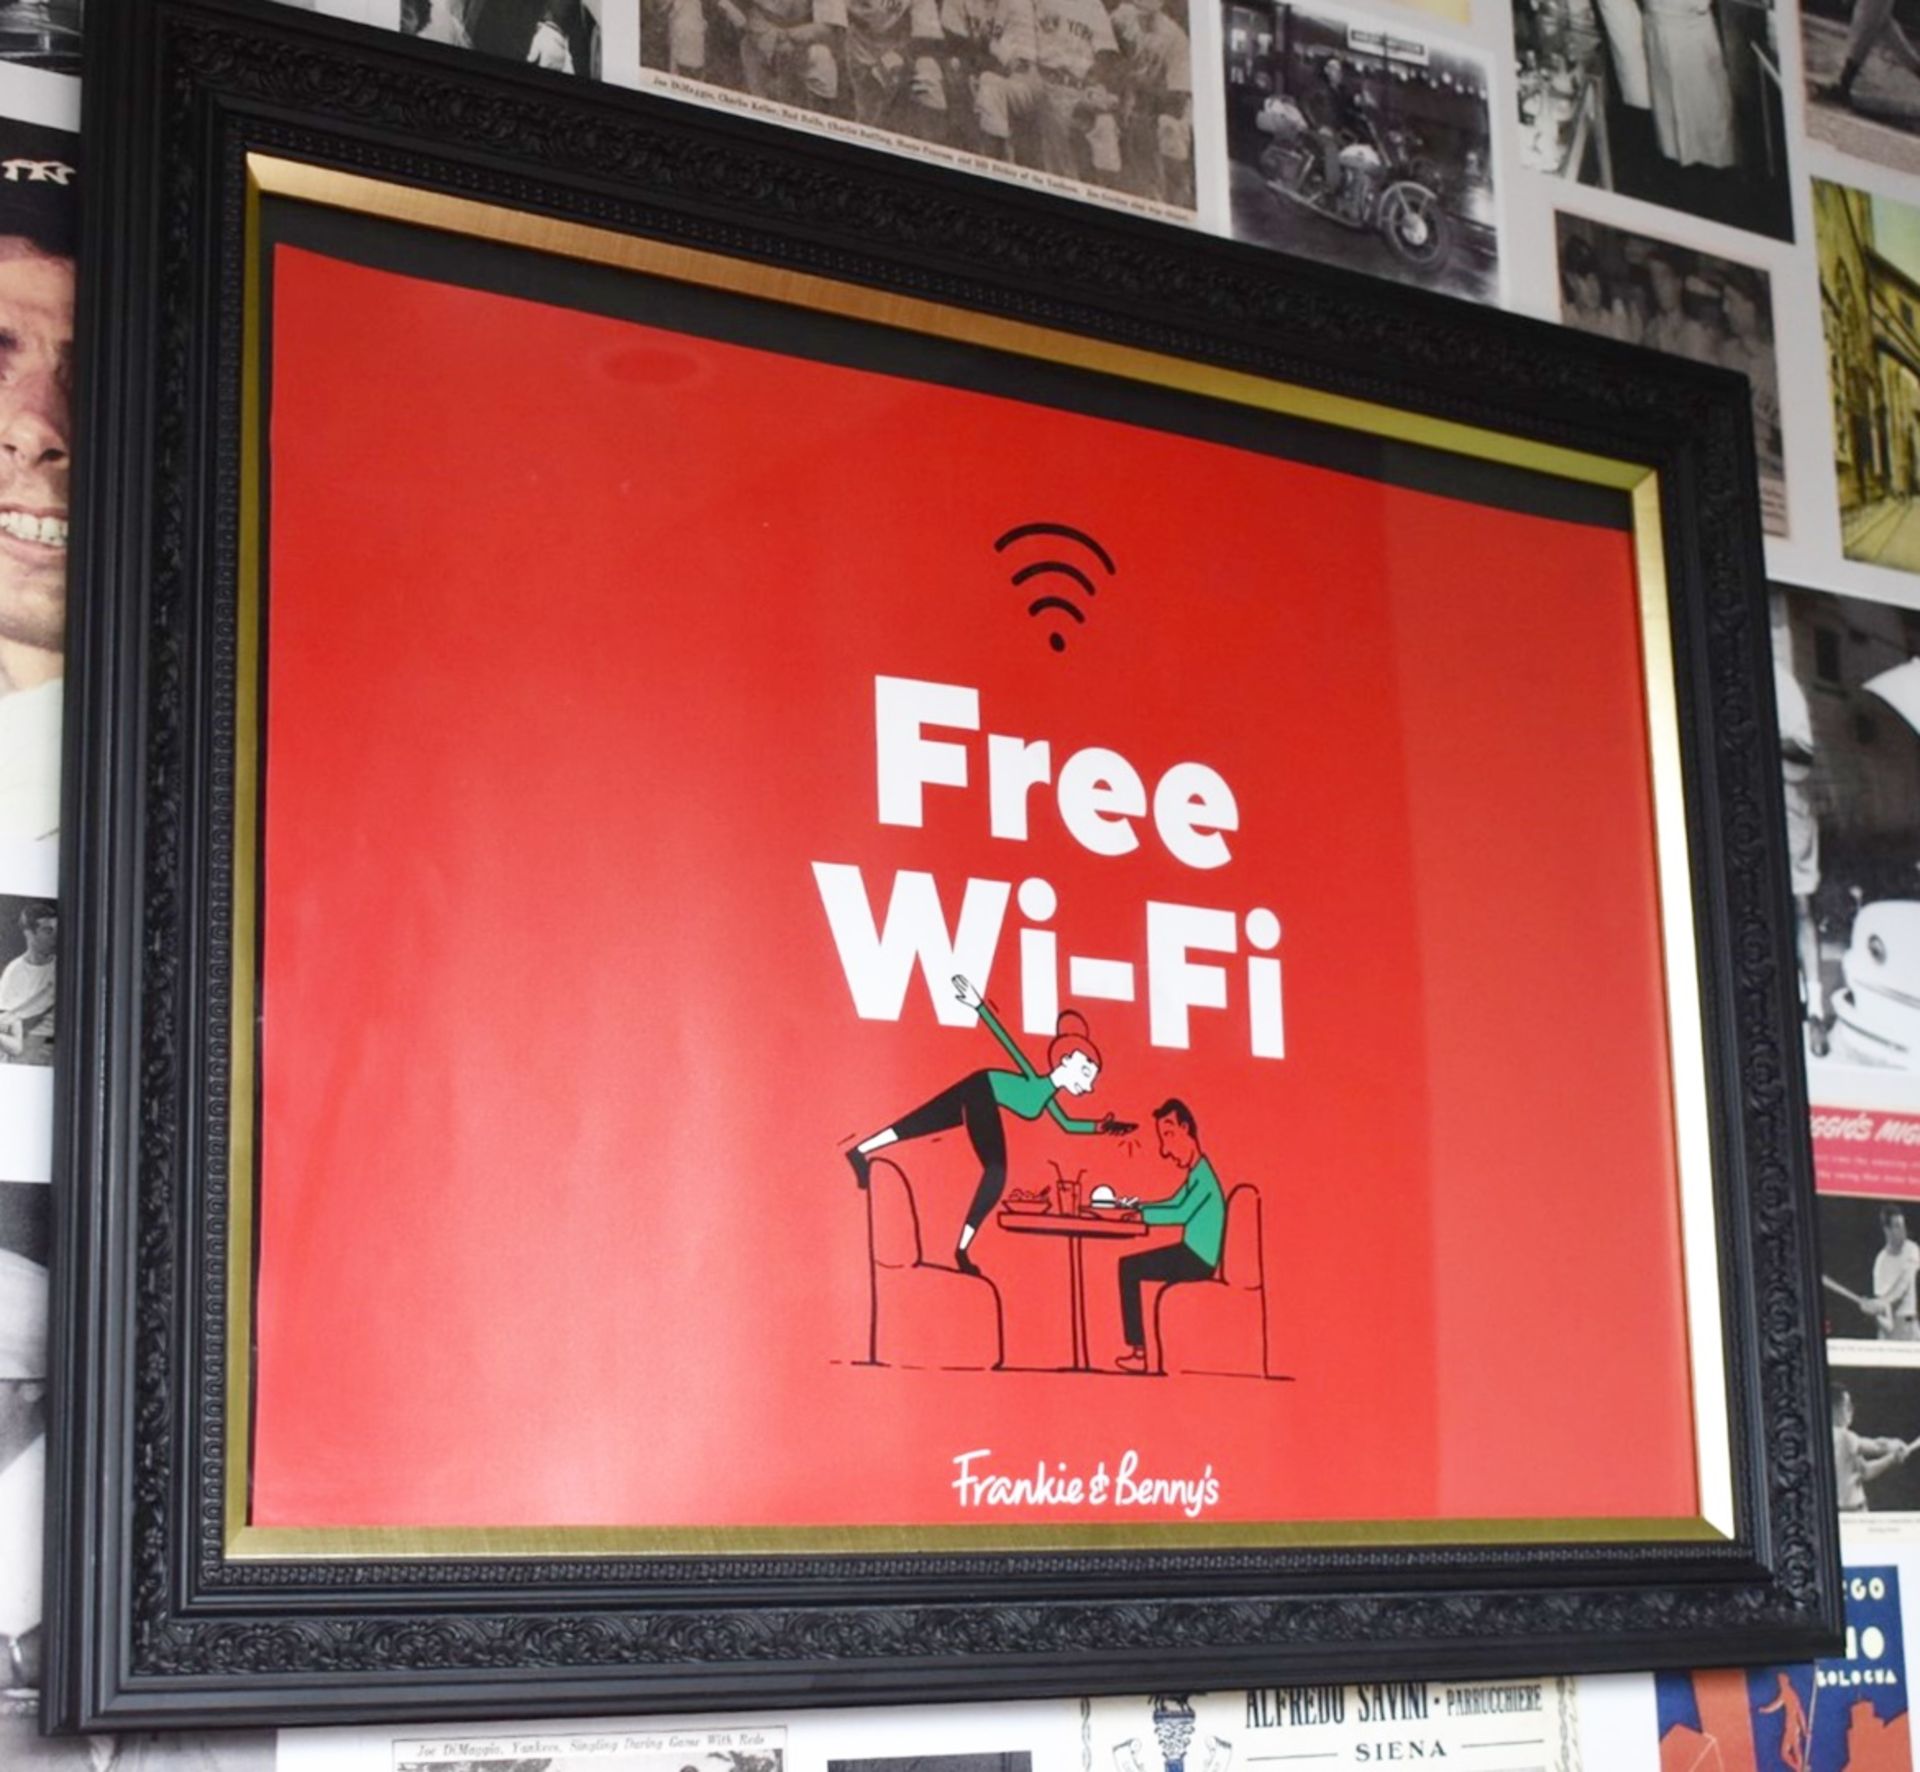 1 x Free Wifi Sign in Ornate Black Frame With Easy Access Opening - Size 64 X 49 cms - CL499 -